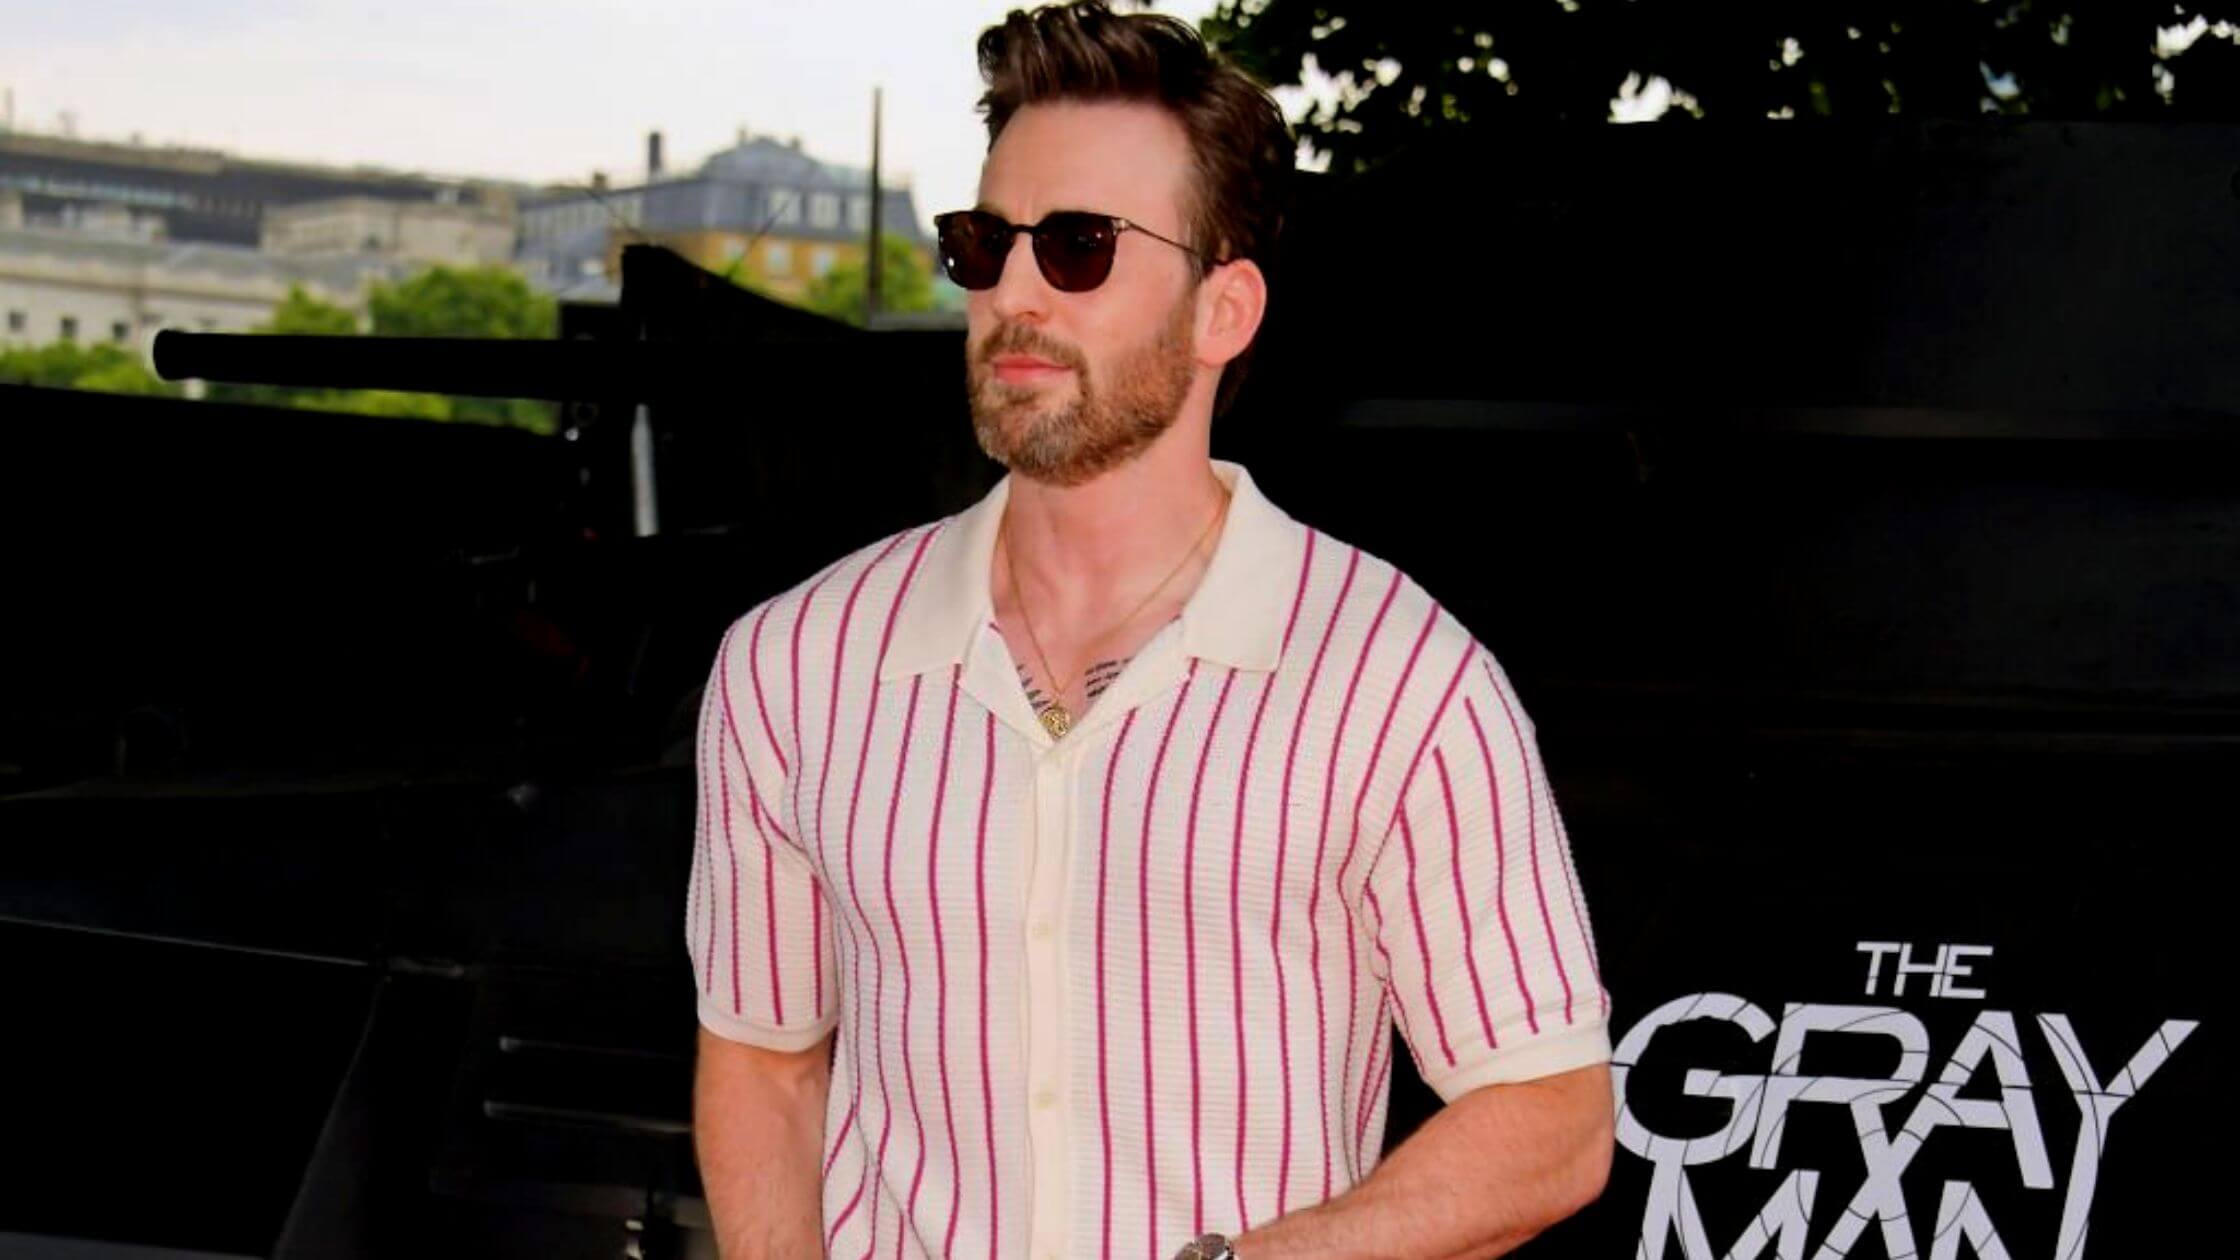 Chris Evans Has Been Crowned People Magazine's Sexiest Man Alive